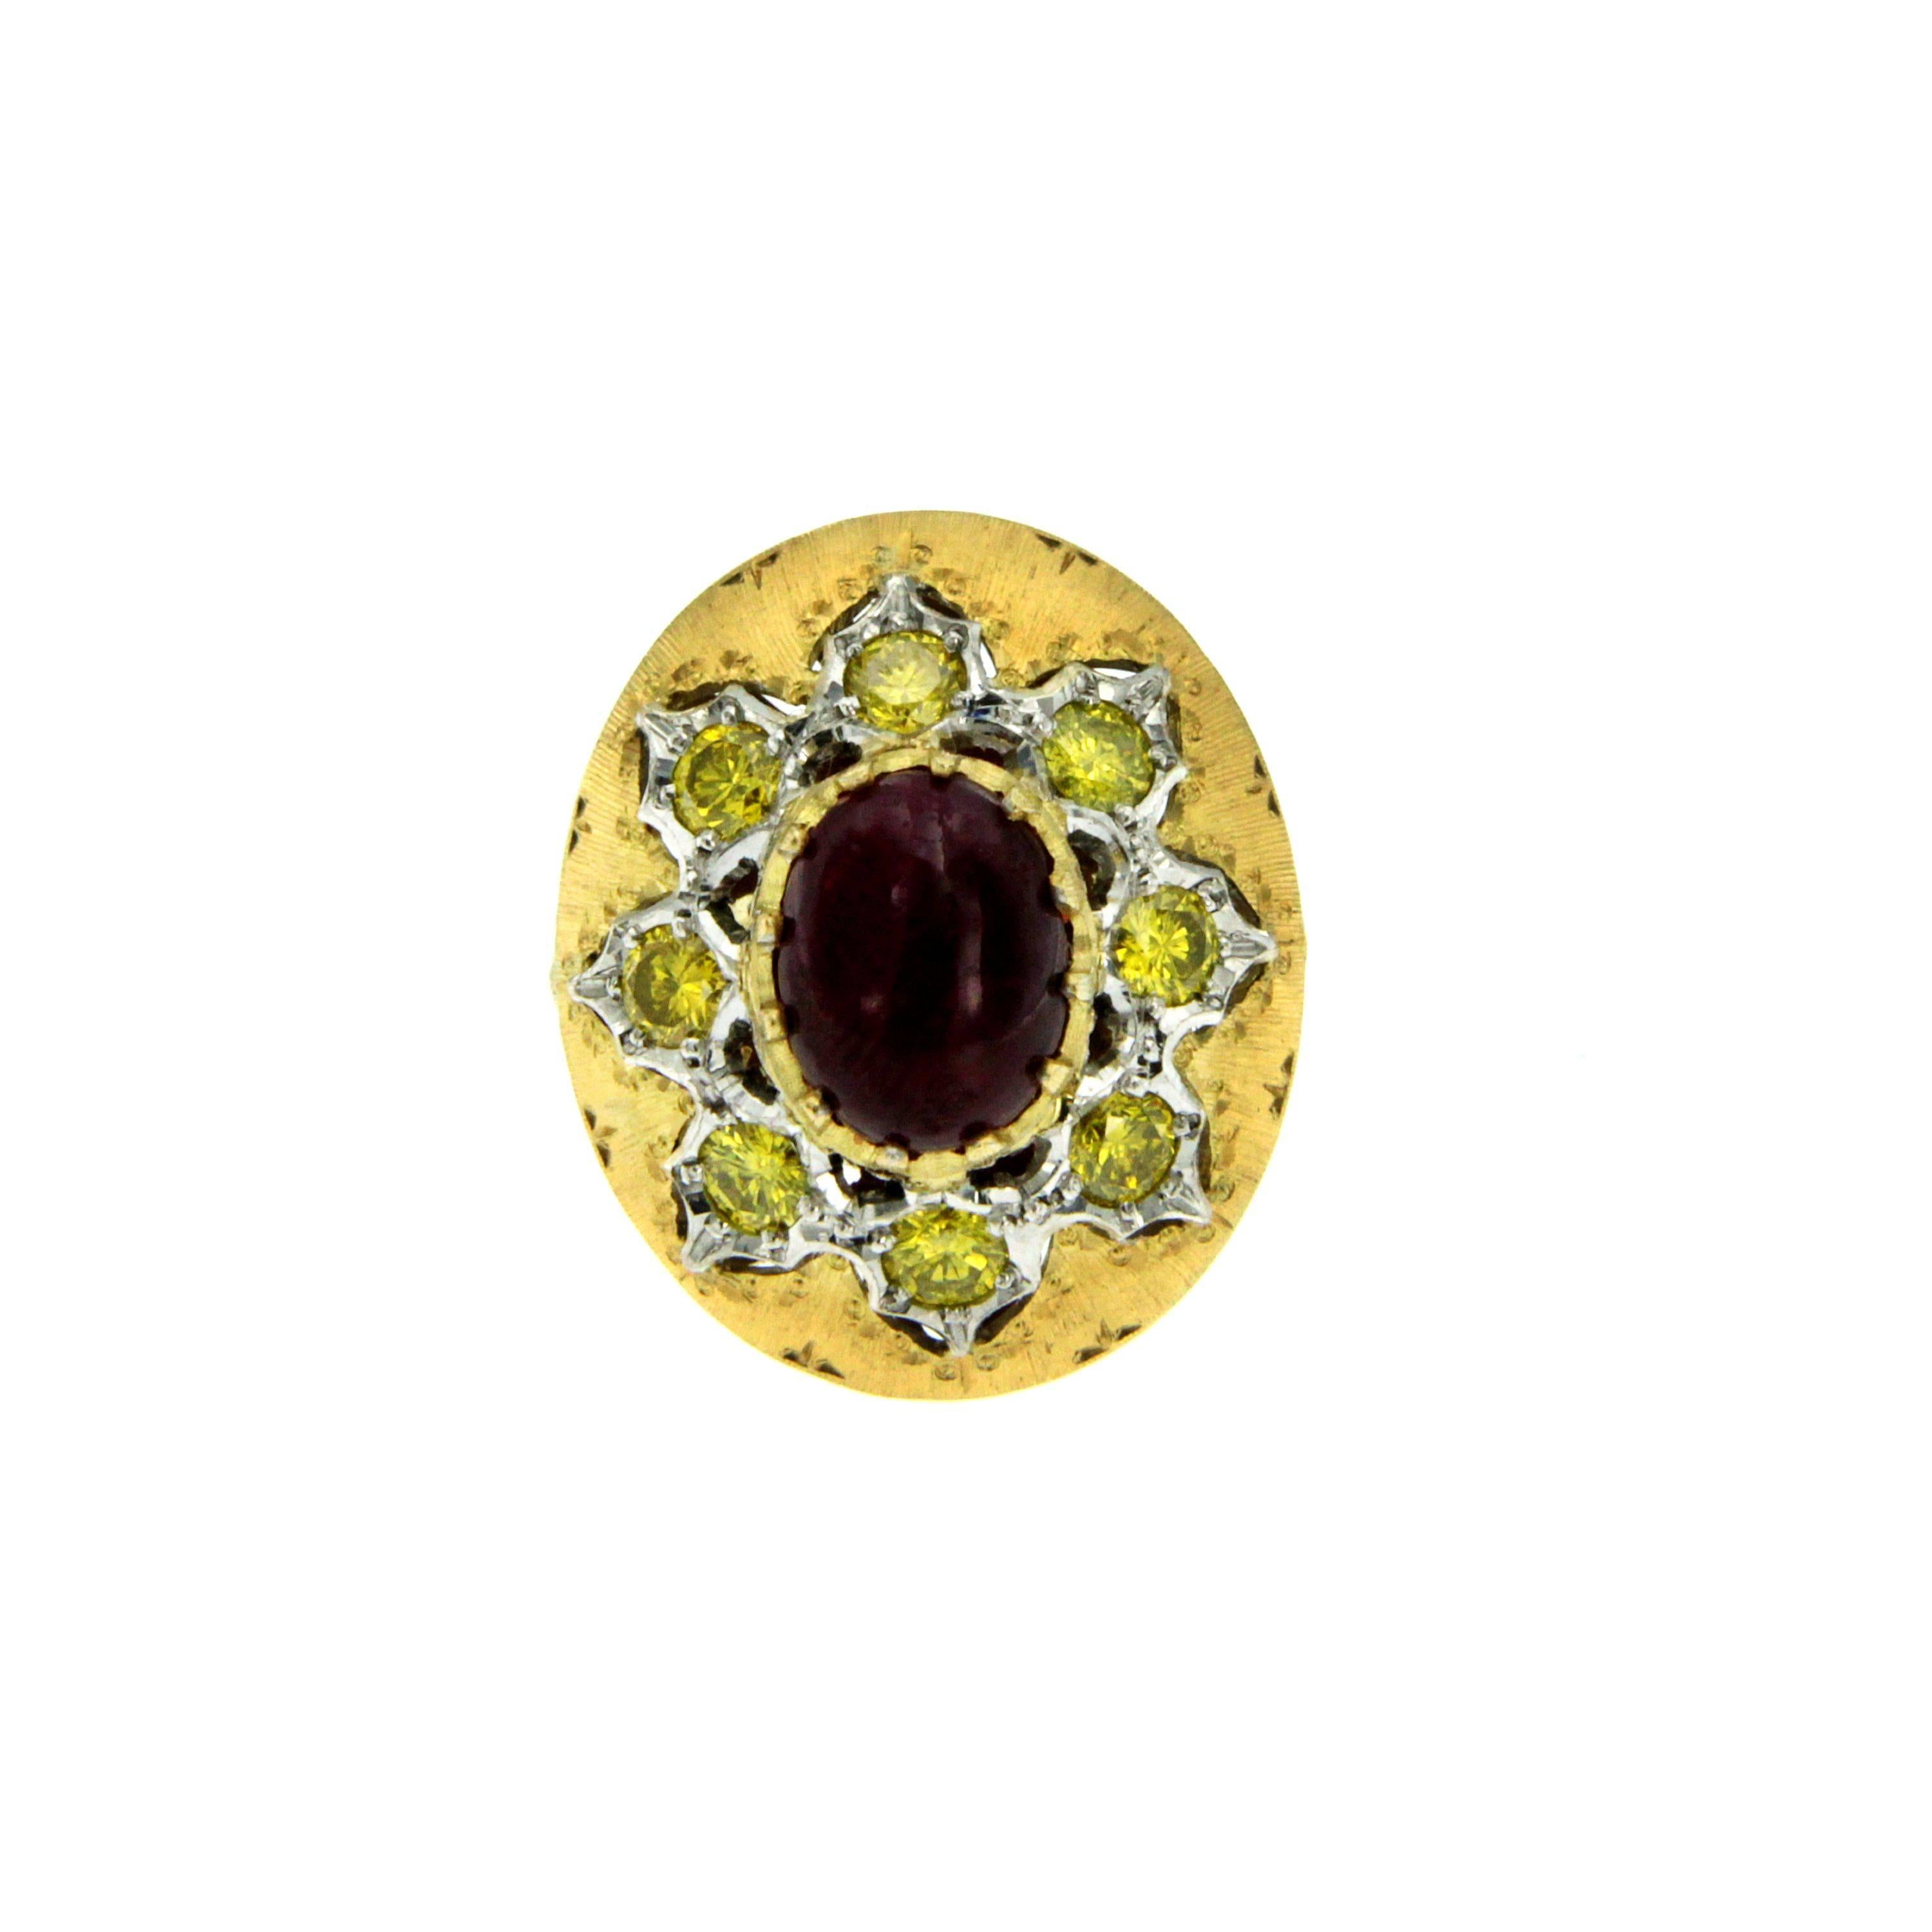 Unique florentine ring and earrings set mounted in 18k yellow Gold. 
Ring: 18k Gold, cabochon Ruby approx. 1.30 ct, round brilliant cut Fancy Diamonds approx. 1.00 carats
Earrings: 18k Gold, cabochon Ruby approx. 2.60 ct,  round brilliant cut